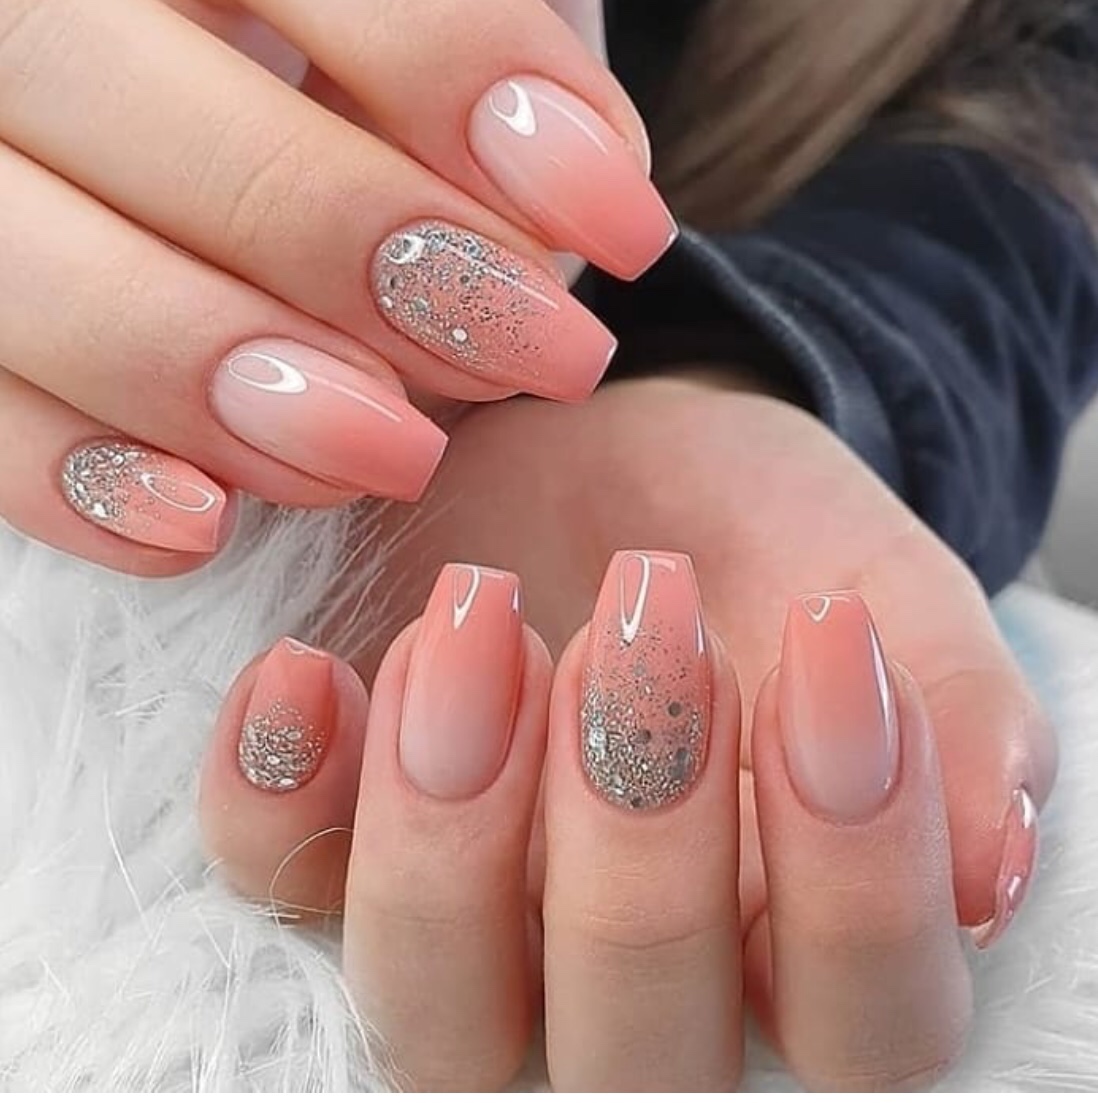 40+ Beautiful Wedding Nail Designs For Modern Brides - The Glossychic